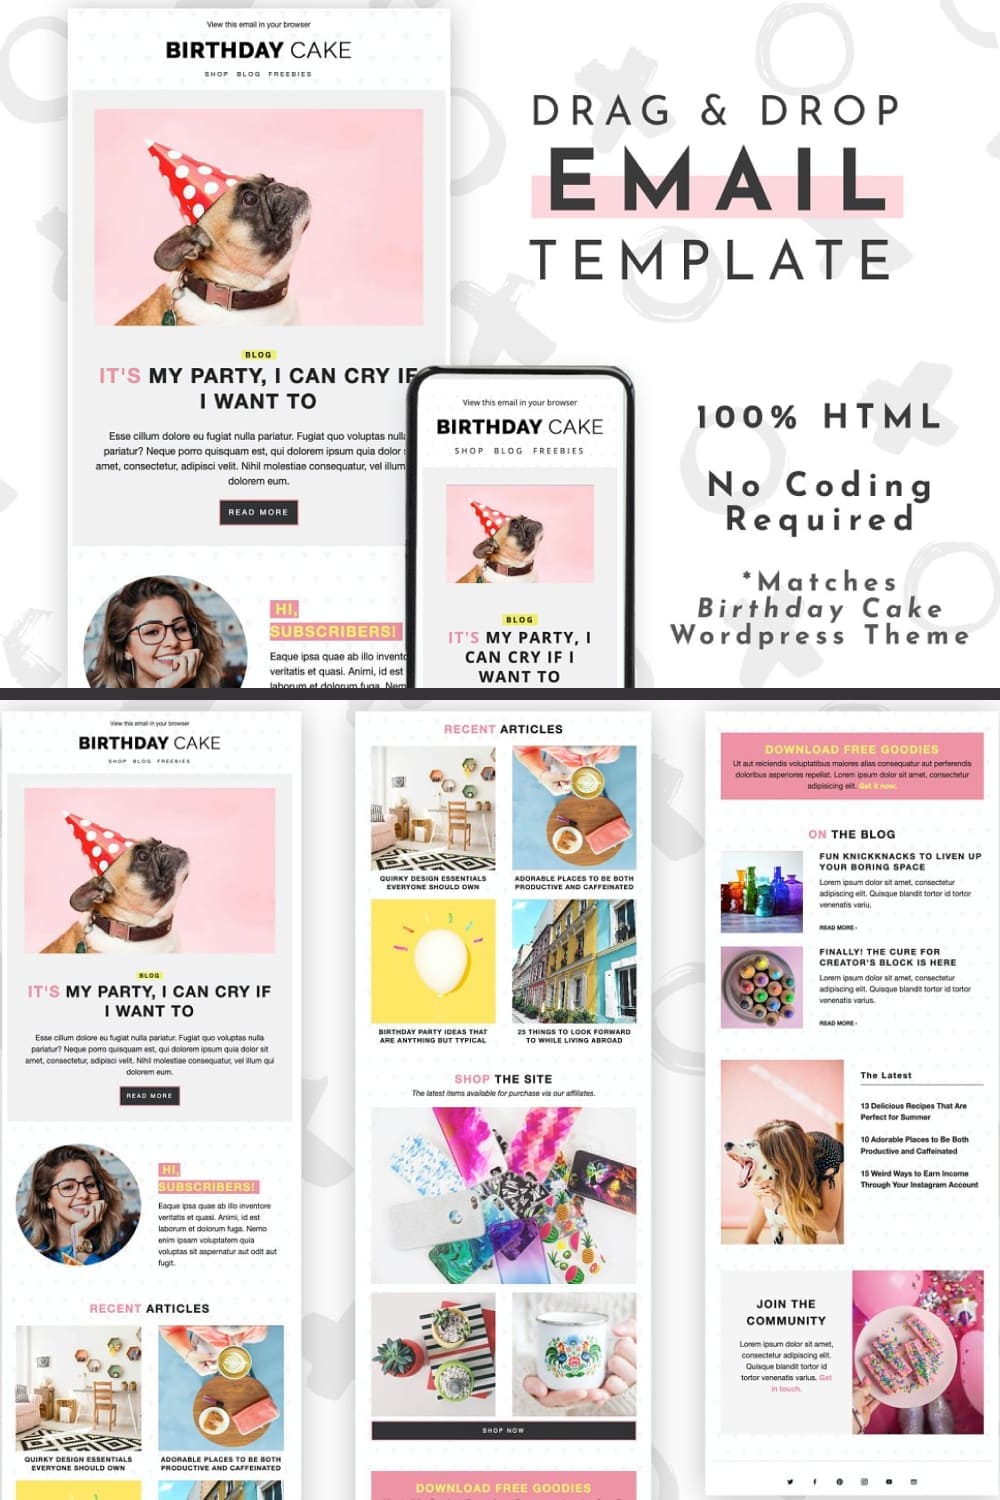 Collection of images of enchanting email design template.